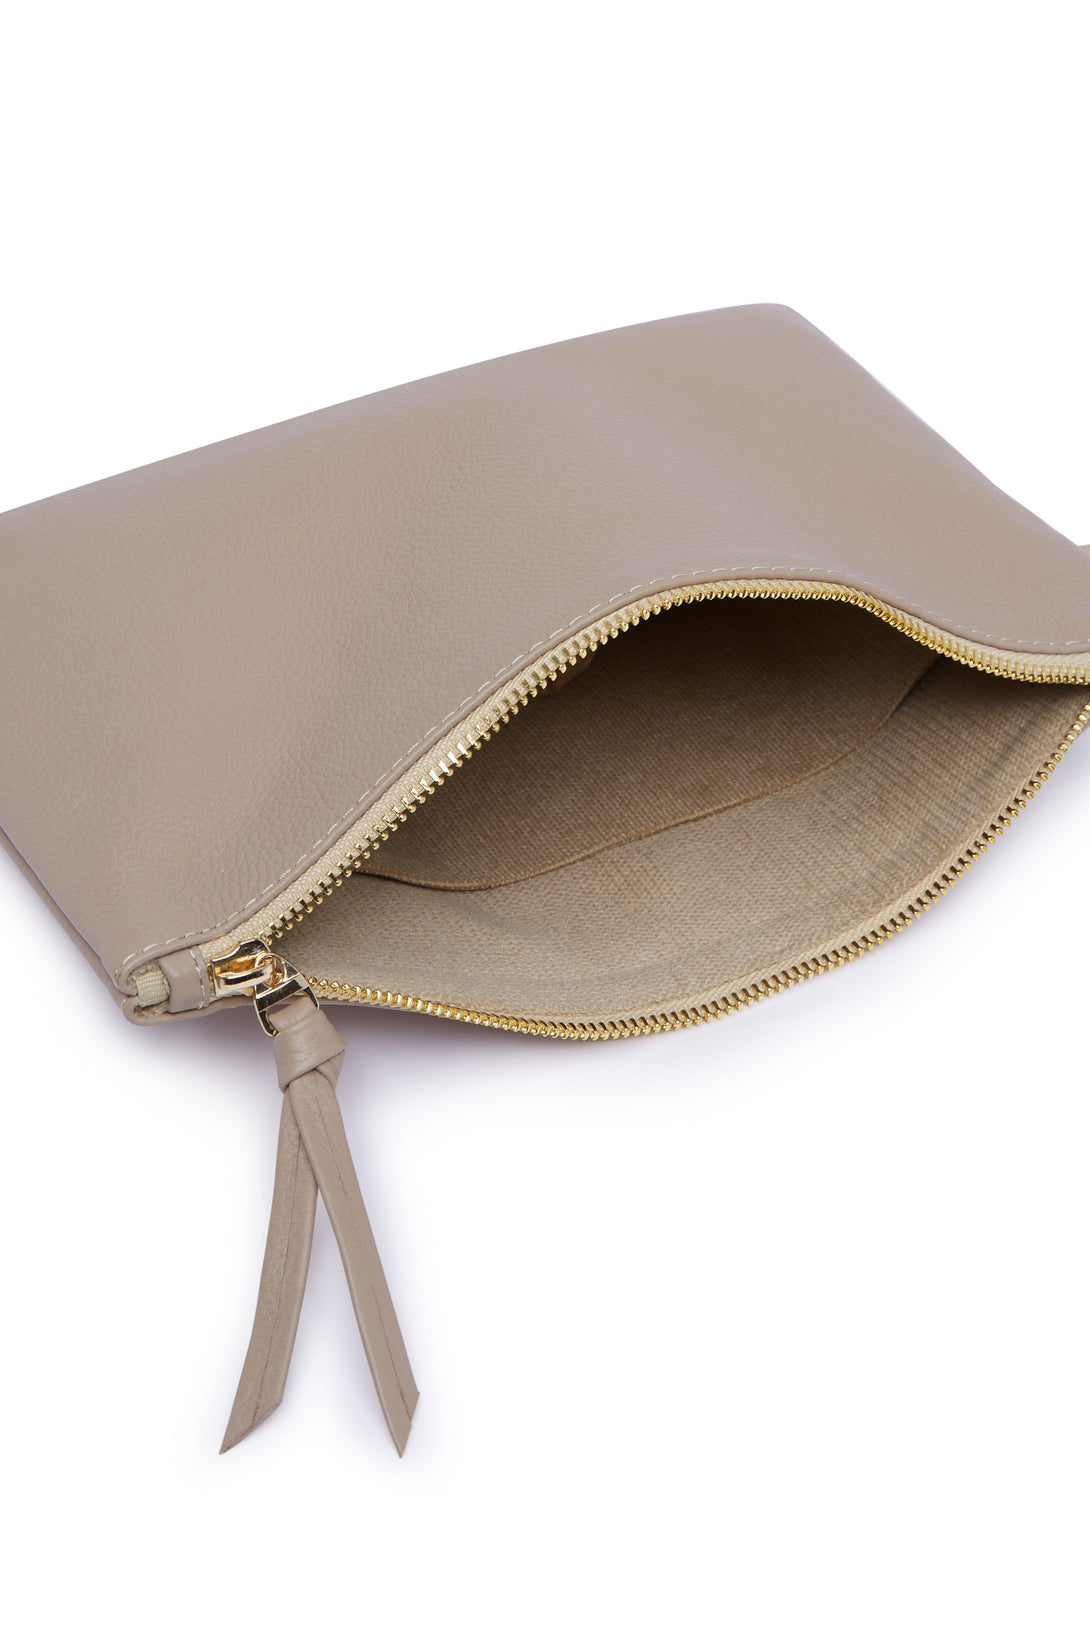 Cassie Clutch Nude Soft Leather - Pre Order Leather